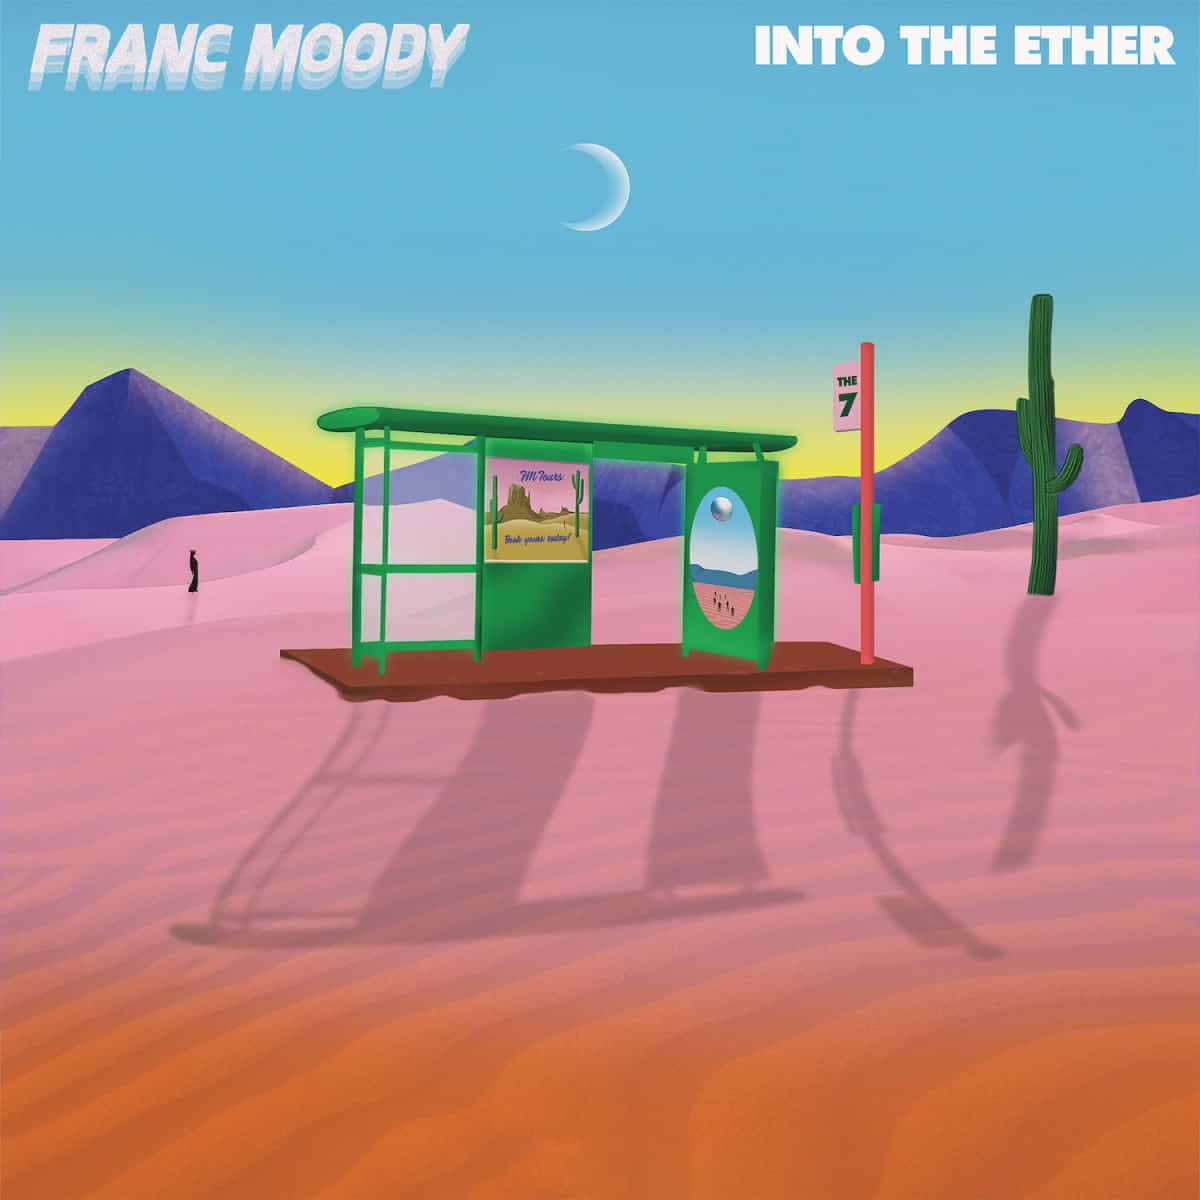 Into the Ether by Franc Moody